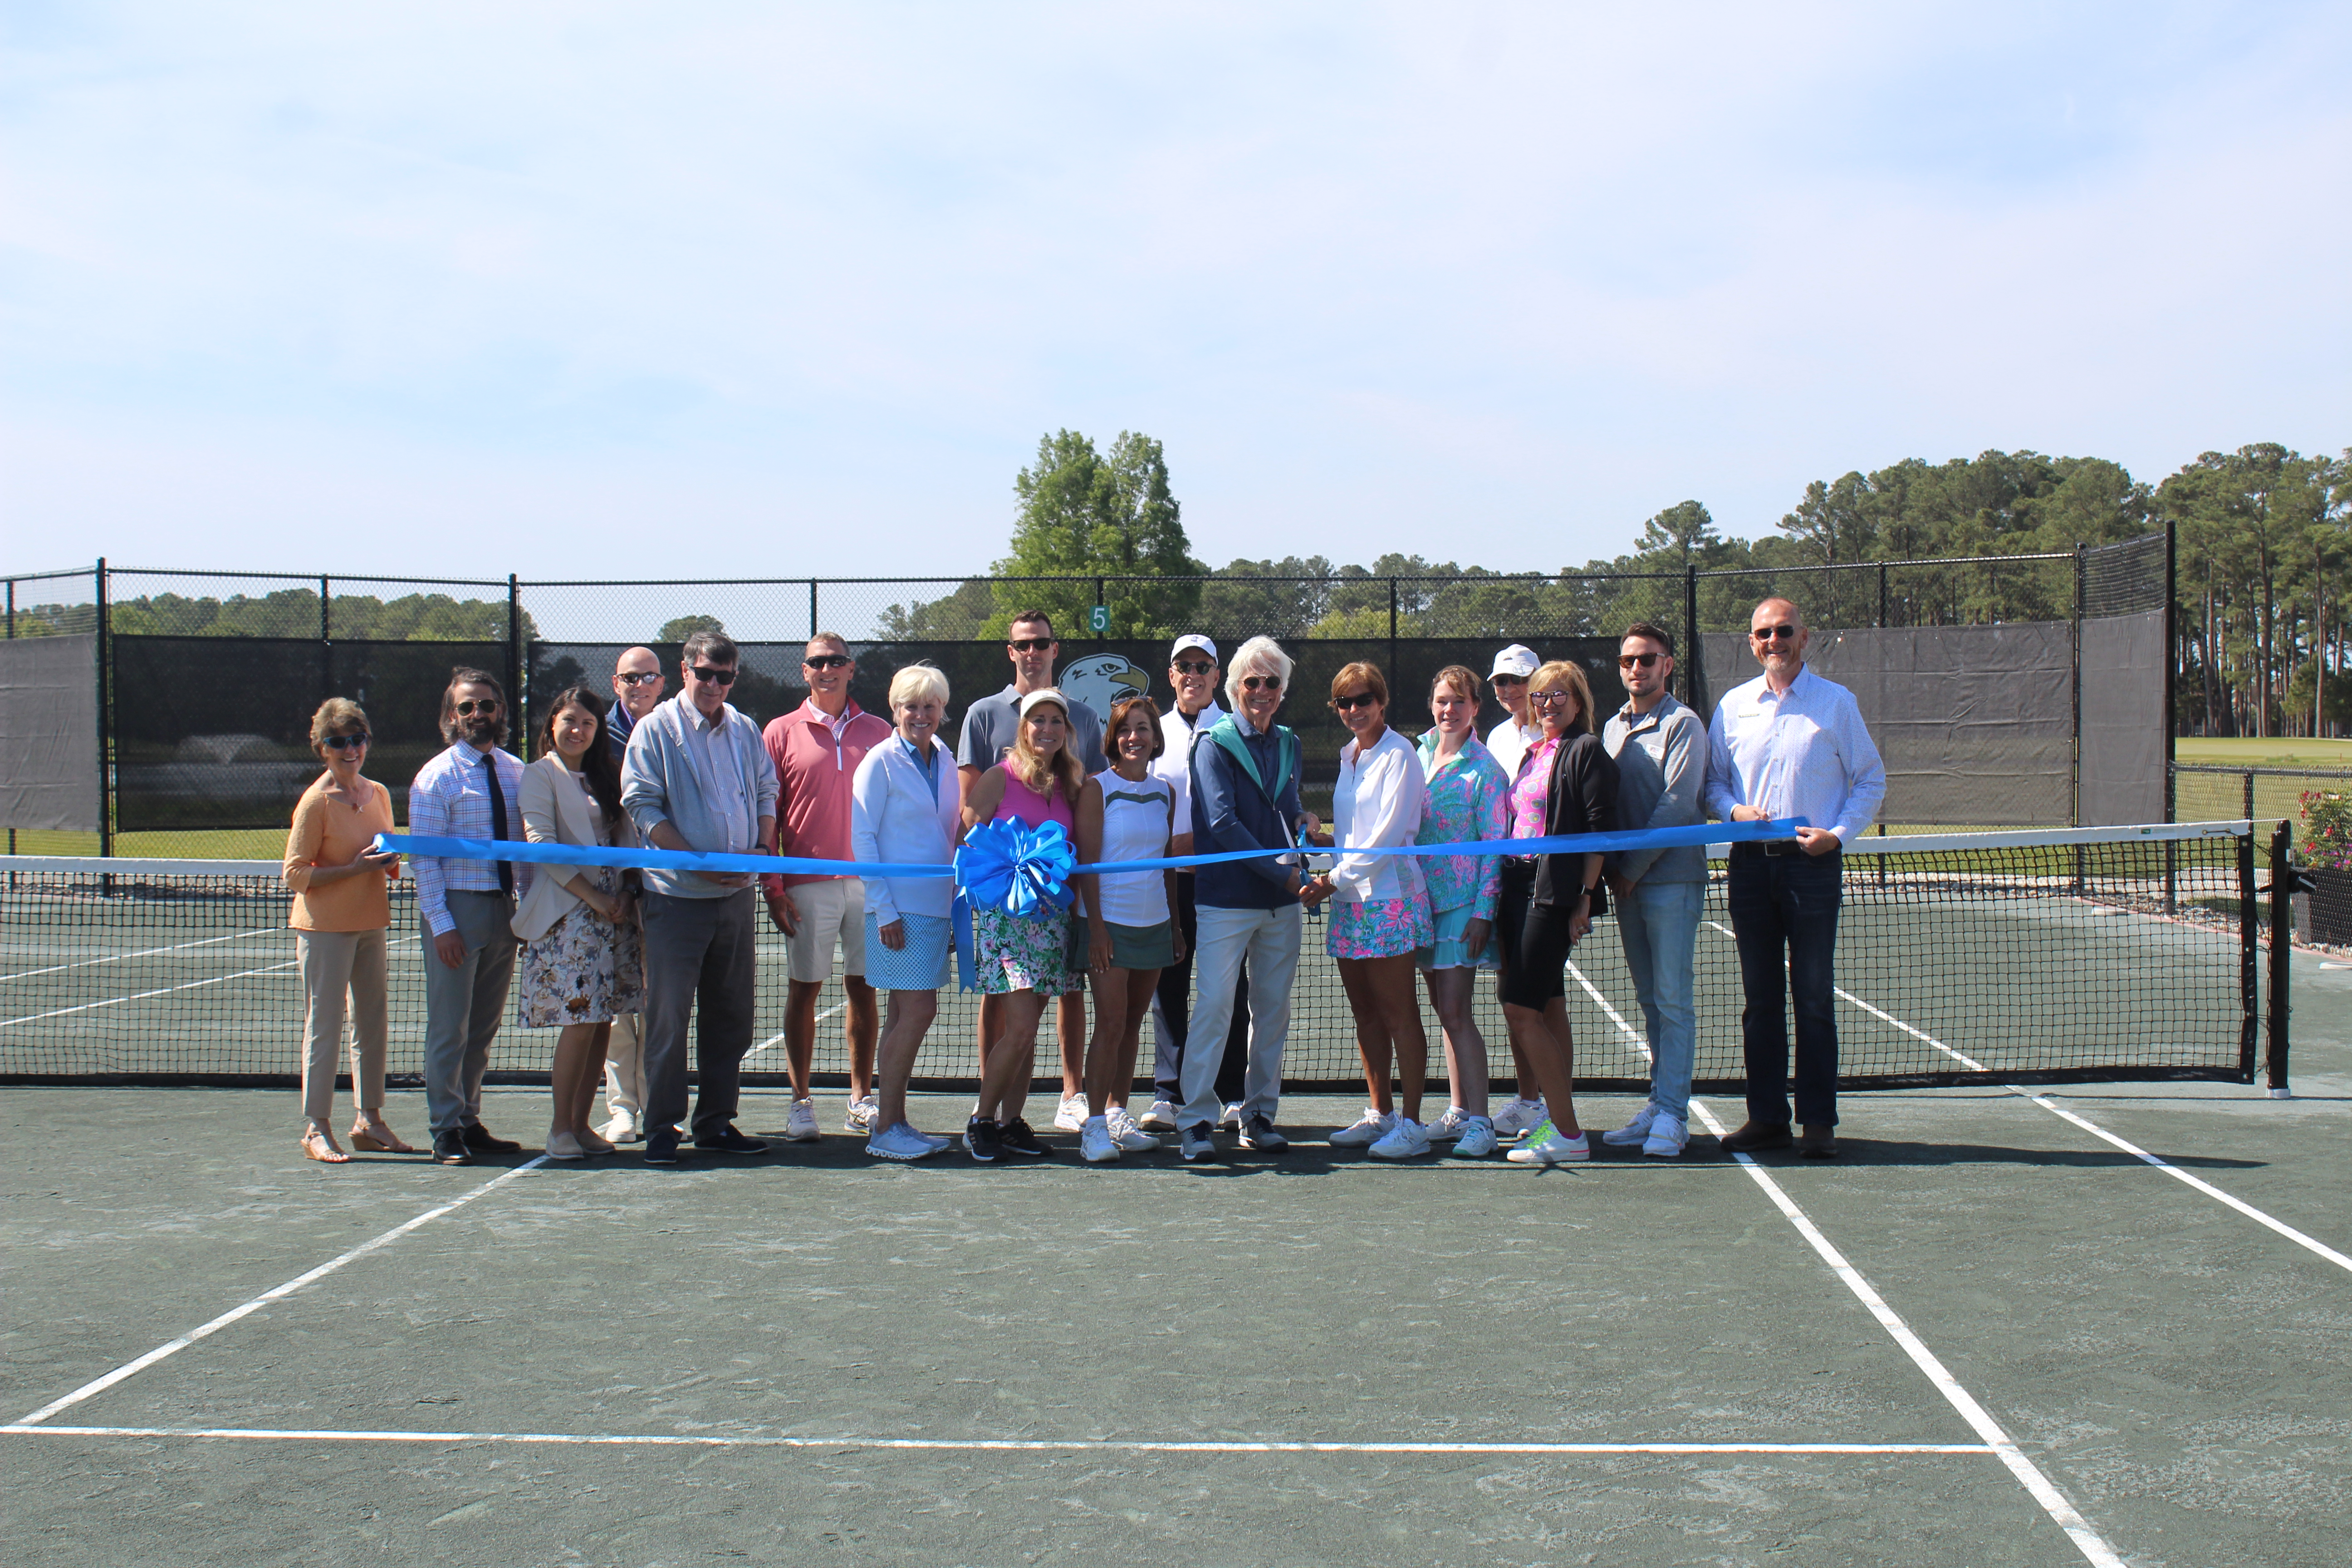 5.26.23 Rehoboth Beach Country Club - New Courts